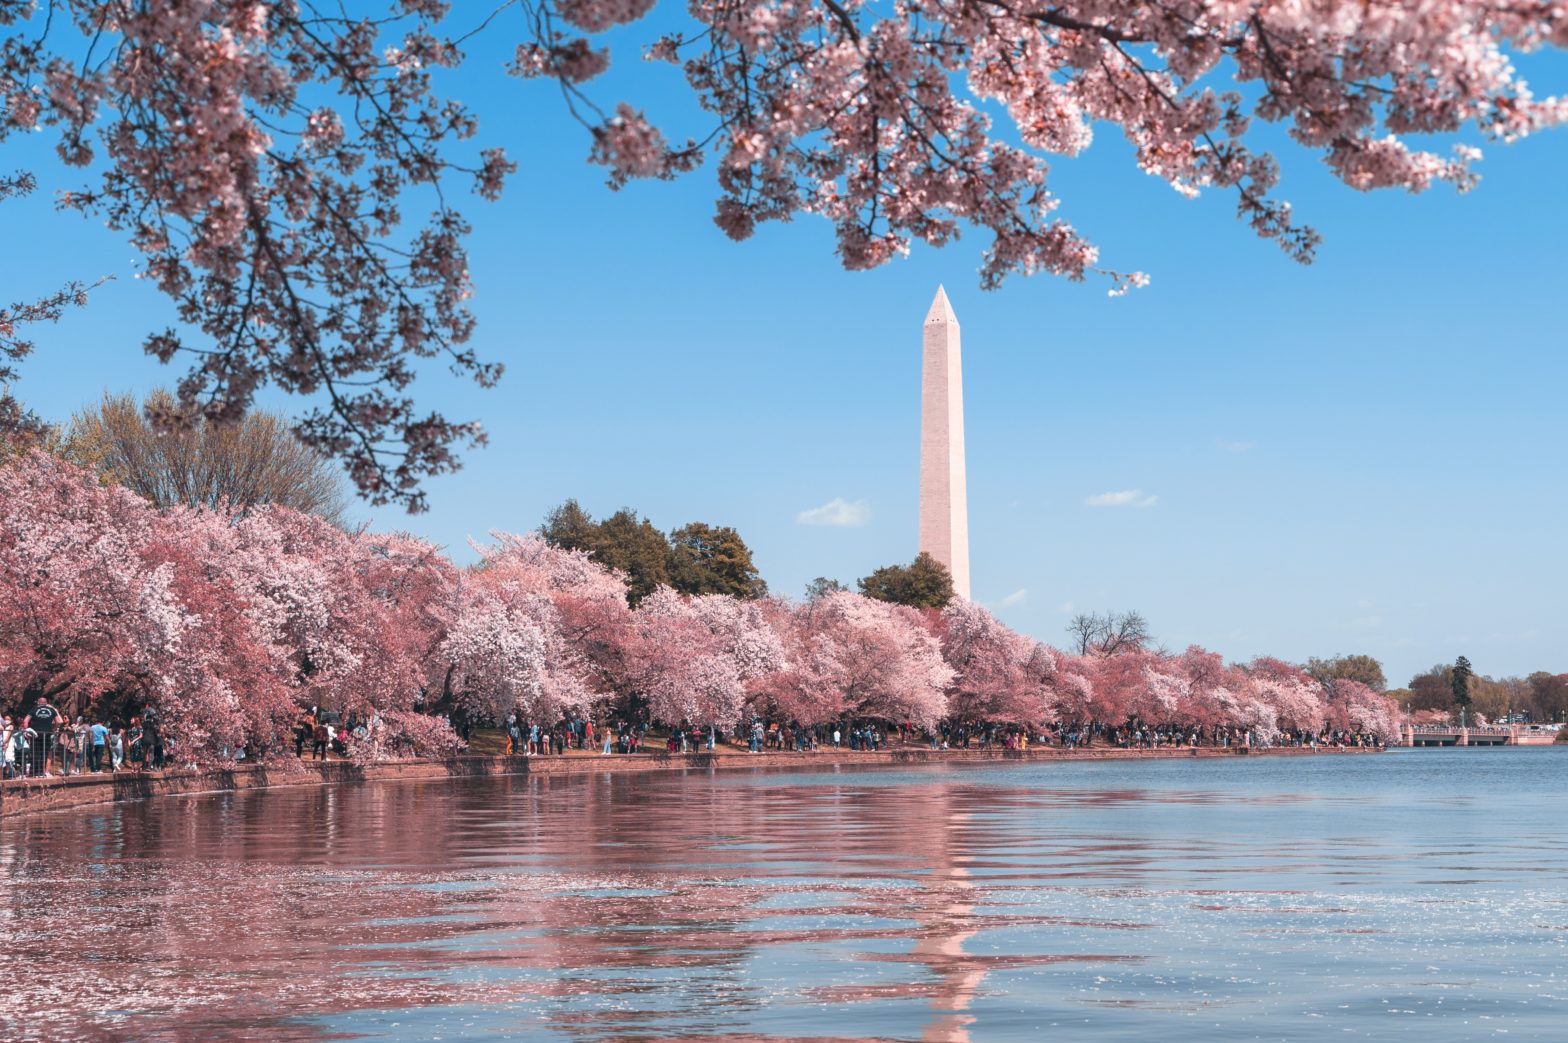 How to Maximize Your Time With One Day In DC